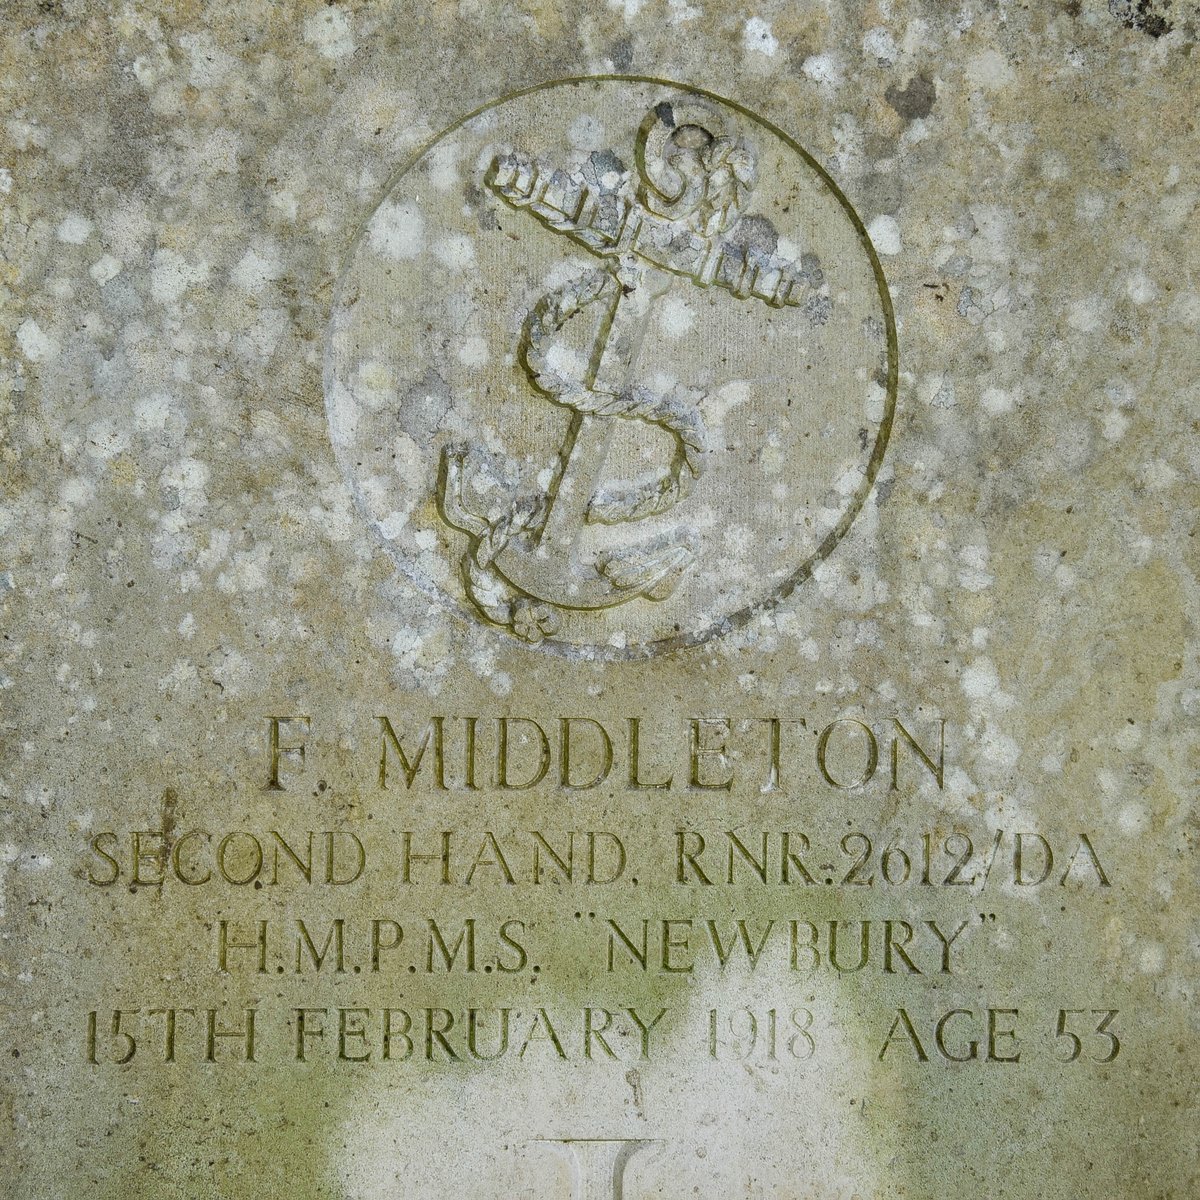 I spent an hour in the graveyard of St Mary's church in Brixham today. This grave with HMPMS intrigued me = His Majesty's Paddle Mine Sweeper. 15 Feb 1918. F Middleton age 53. Details. en.wikipedia.org/wiki/HMS_Newbu… @militaryhistori @CWGC @I_W_M @curatorian @warsmatter @DrHelenFry